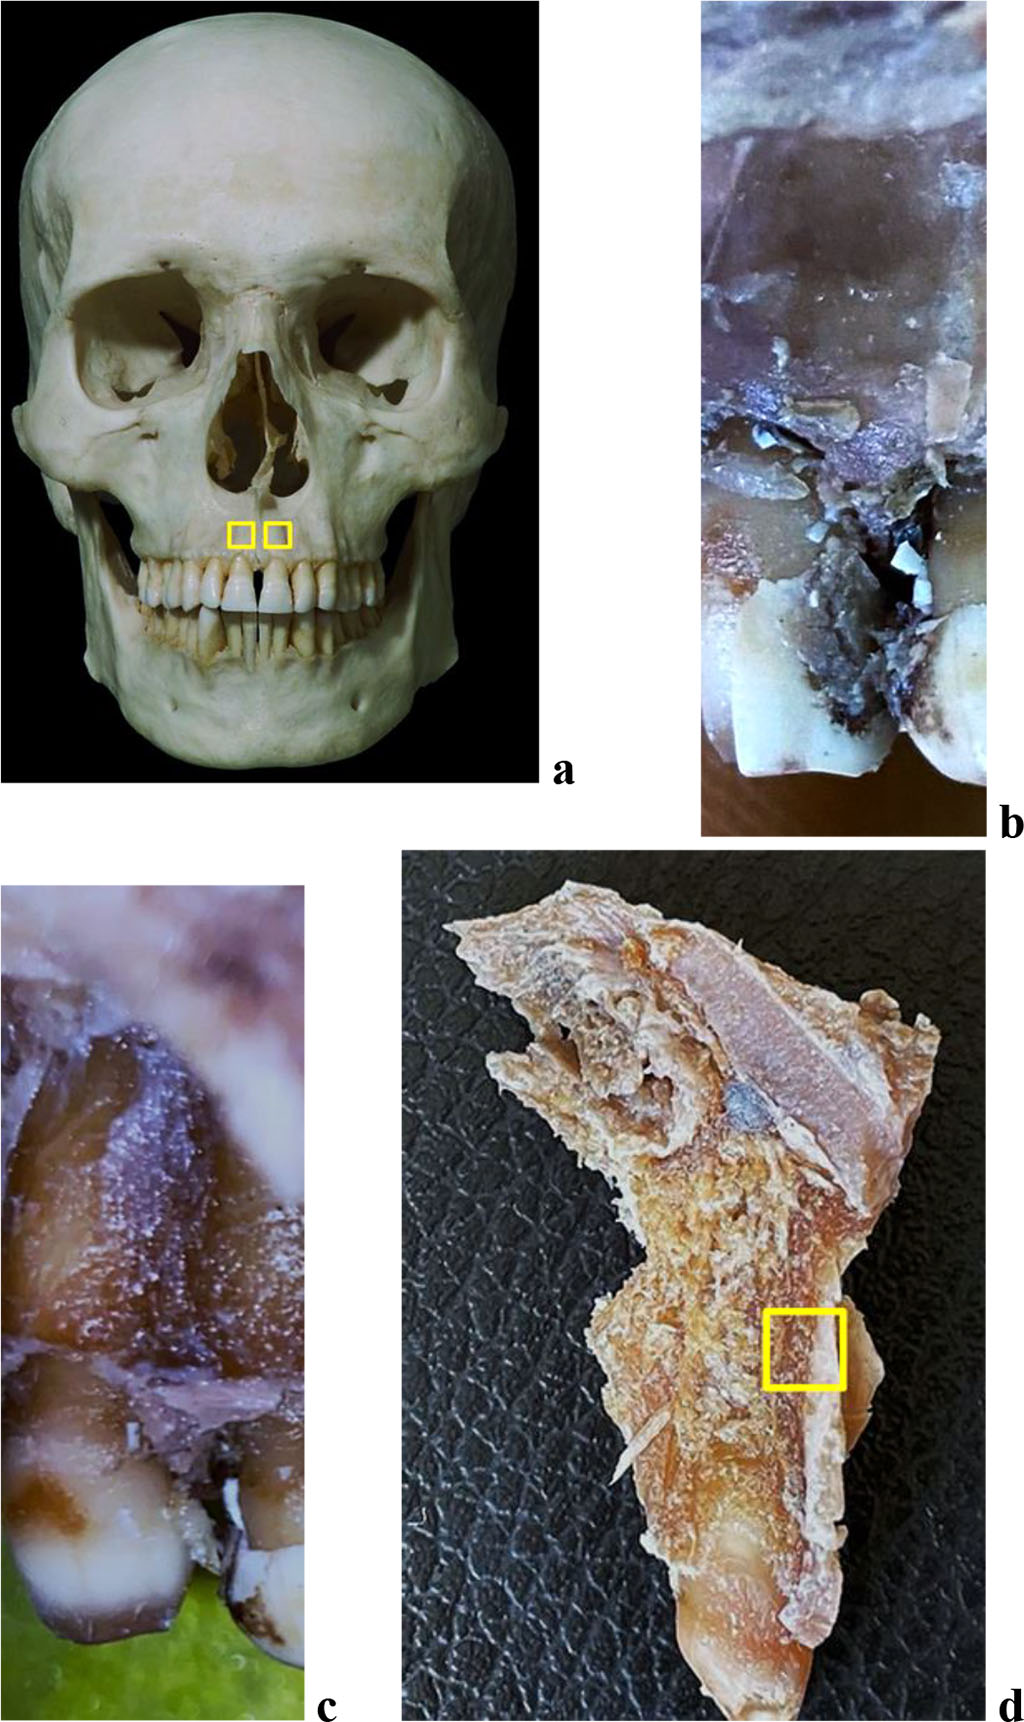 Figure 1. Bone biopsy specimen from the frontal alveolar process of the maxilla with preserved dentition: a – areas for taking bone preparations on the skull; anatomical preparation before (b) and after (c) separation of the muco-periosteal flap in the area of 21 teeth; d – area for taking a bone preparation on the maxillary medial incisor segment of the maxilla (21 teeth).